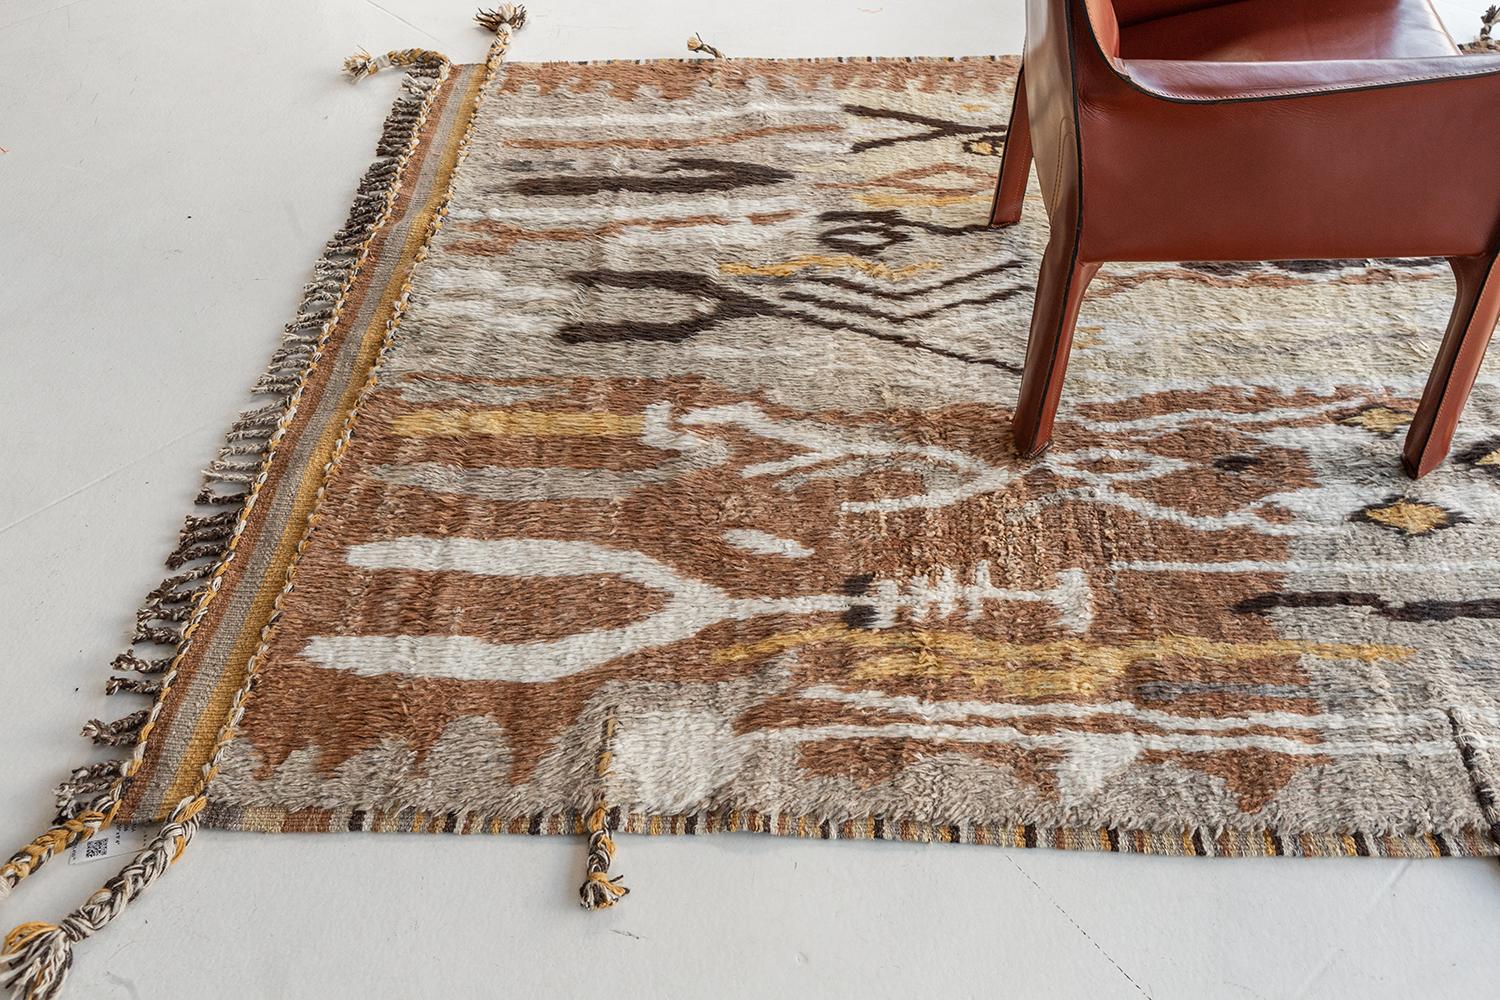 Rikasa is a luxurious wool with amorphous shapes in subtle gradations of charcoal, ivory, and cream. Its embossed handwoven wool features a series of free-spirited rugs that feels innately soft underfoot and is enhanced by extraordinary, valiant